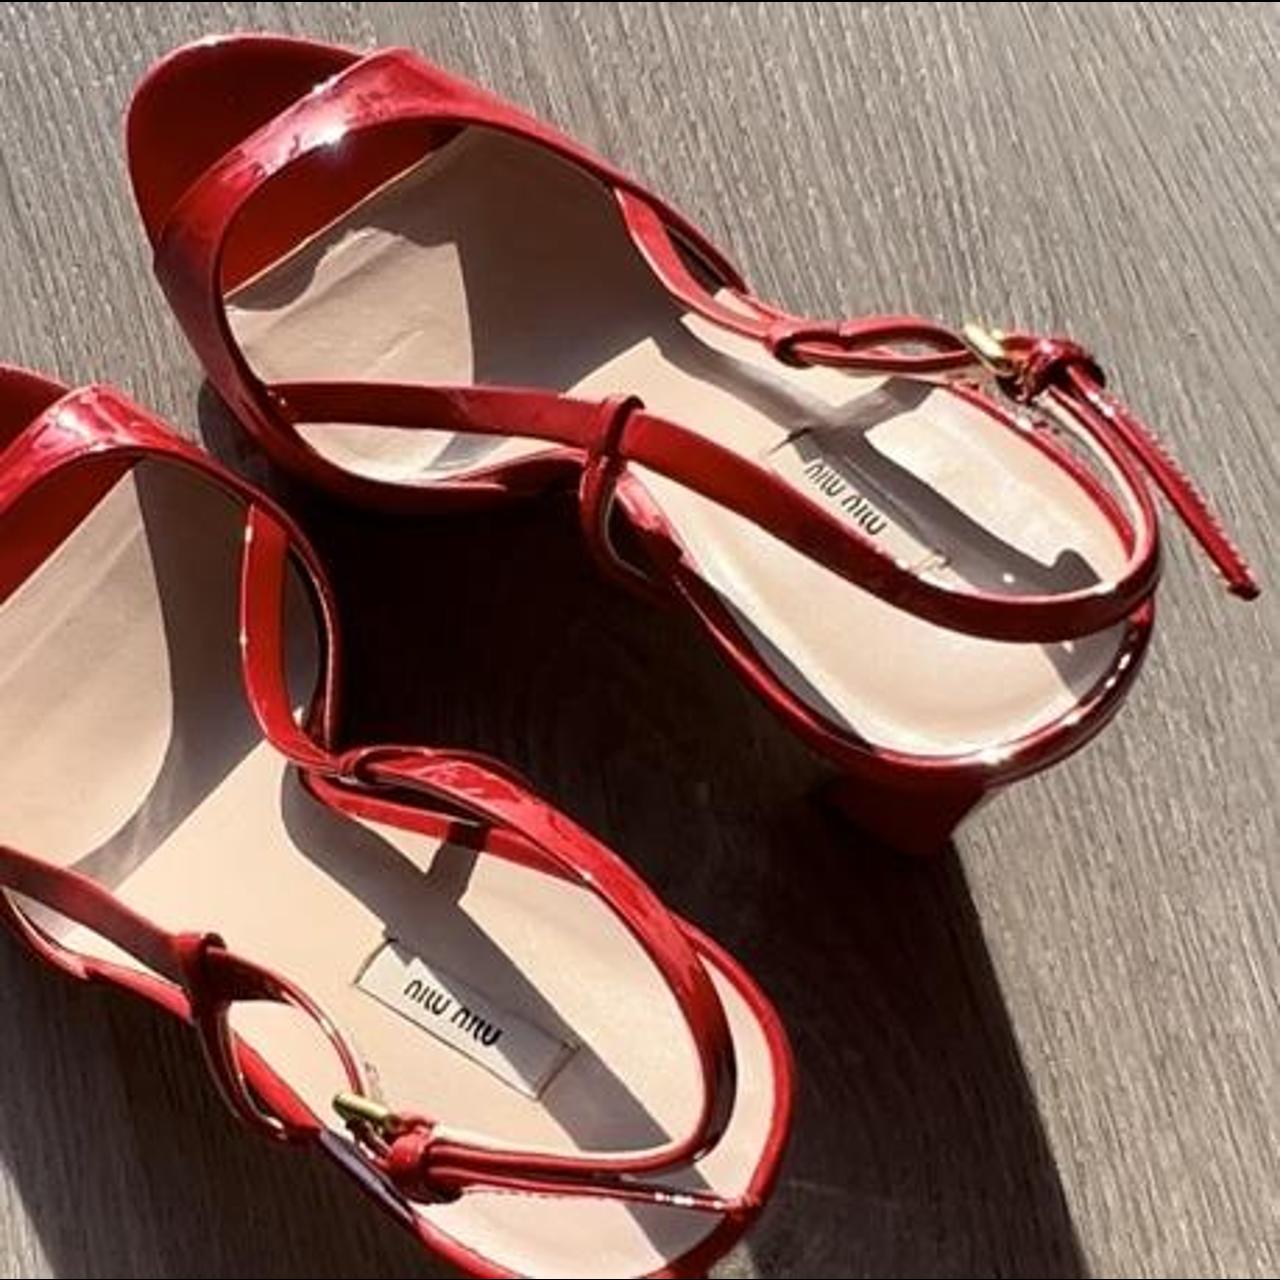 Product Image 4 - 🍒🍒
MiuMiu heels
the second photo shows